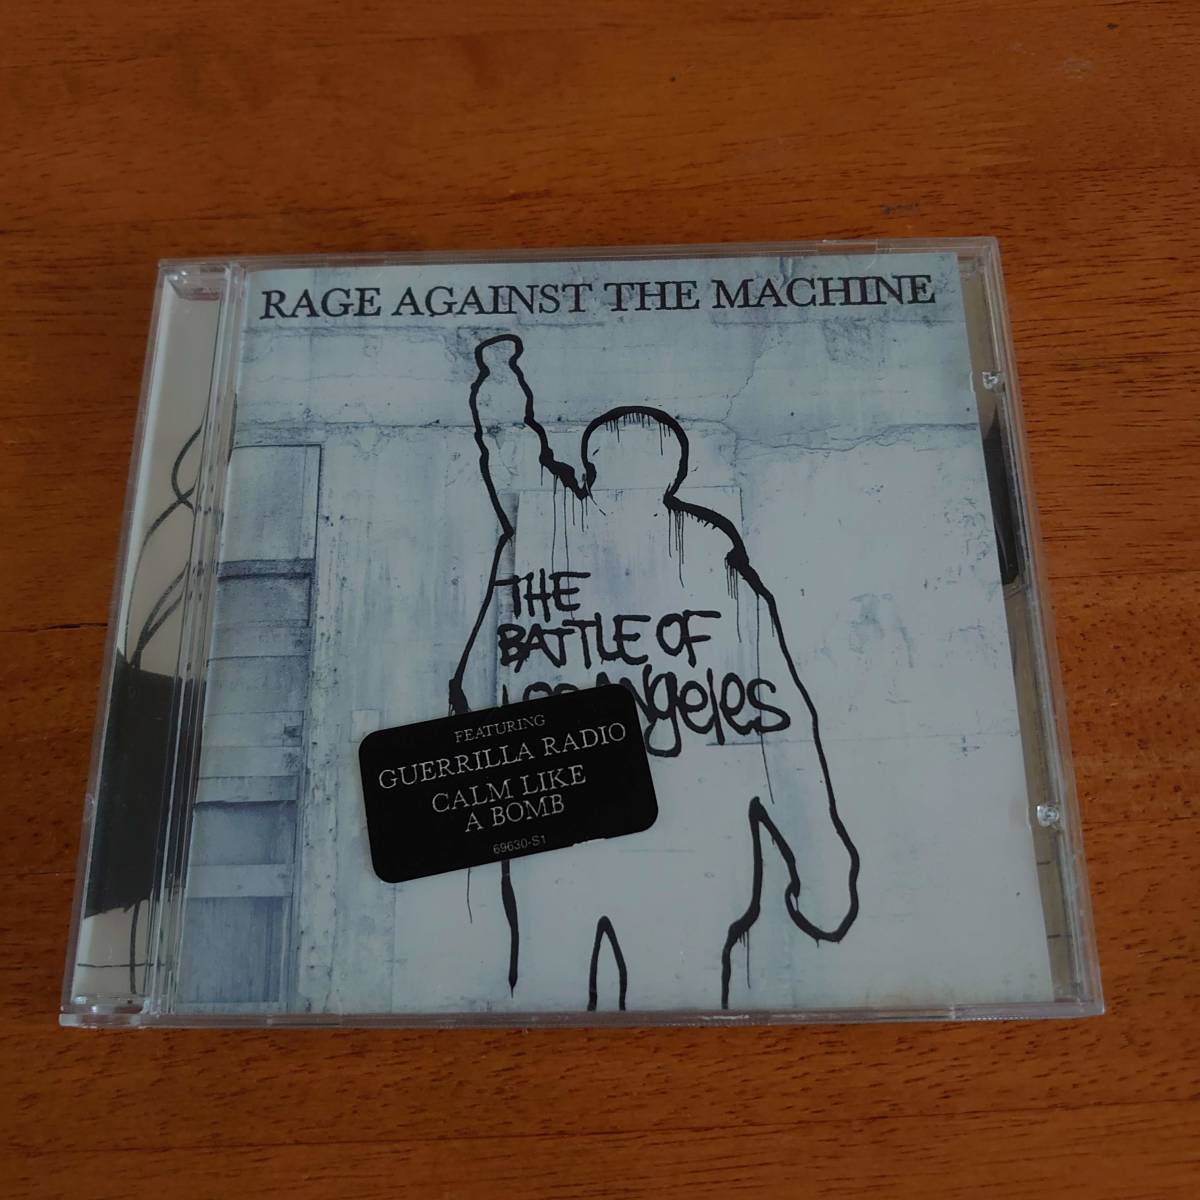 RAGE AGAINST THE MACHINE / THE BATTLE OF LOS ANGELES レイジ・アゲインスト・ザ・マシーン 輸入盤 【CD】_画像1